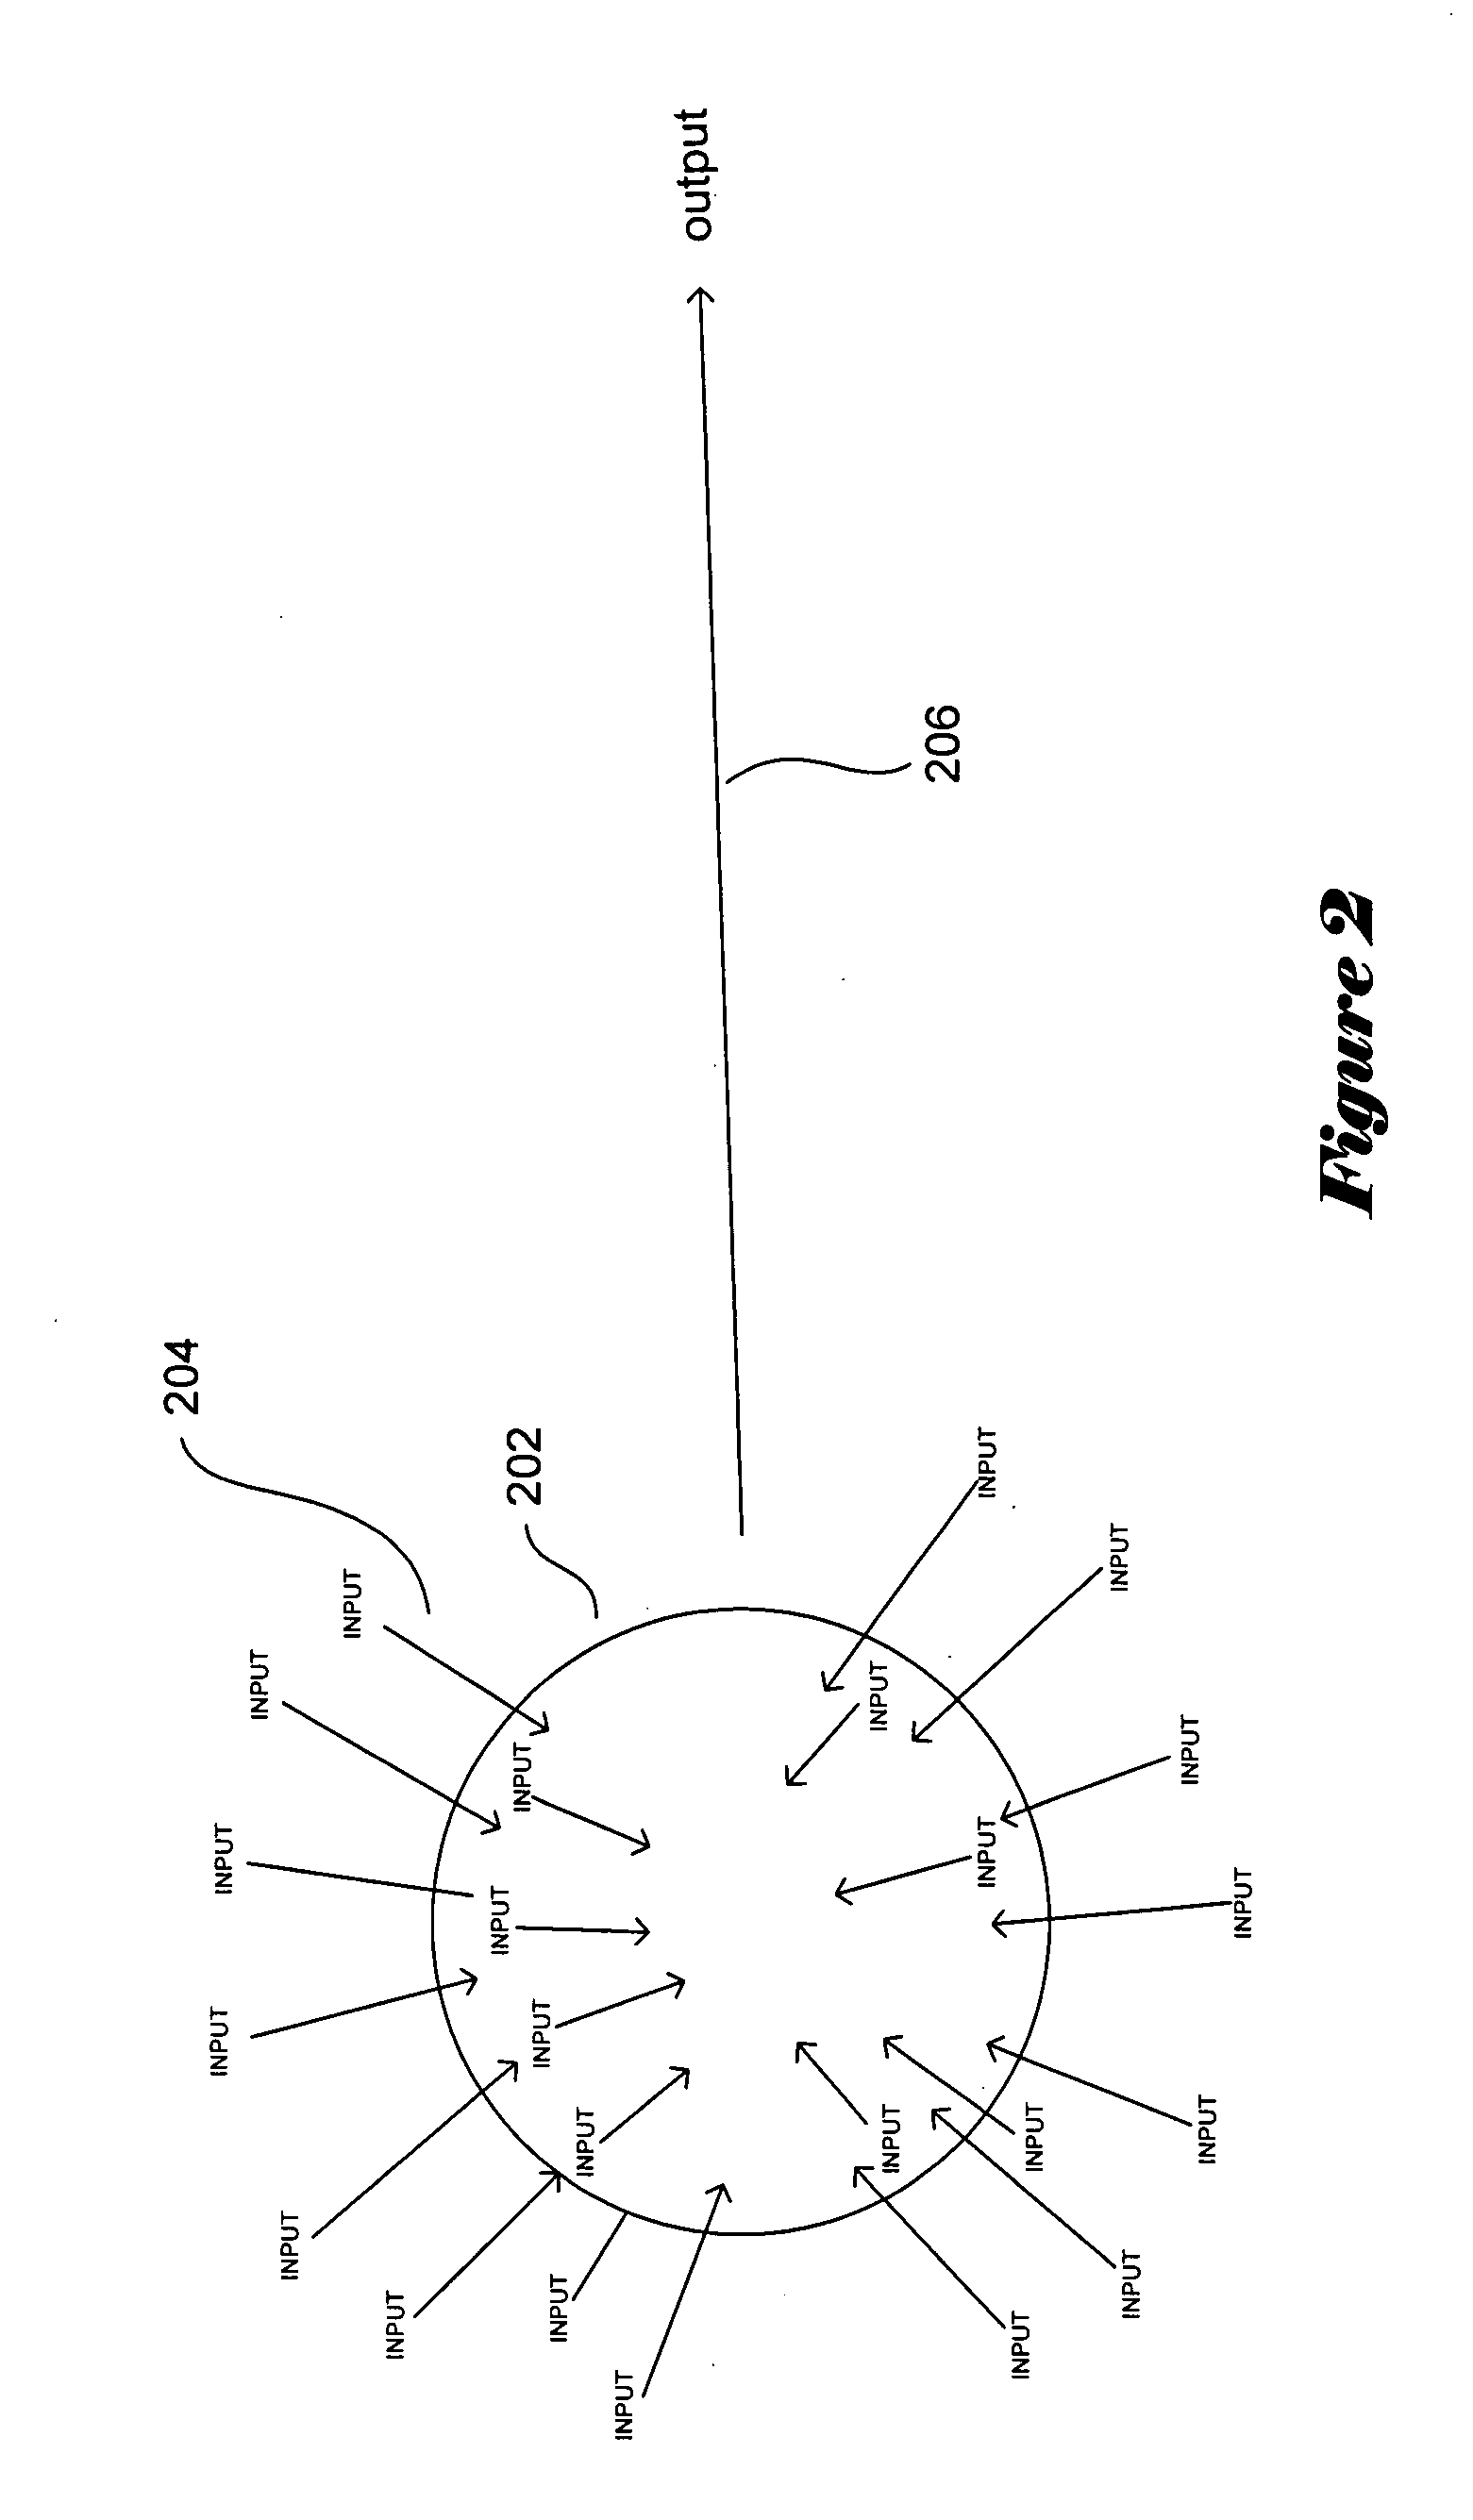 Computational nodes and computational-node networks that include dynamical-nanodevice connections